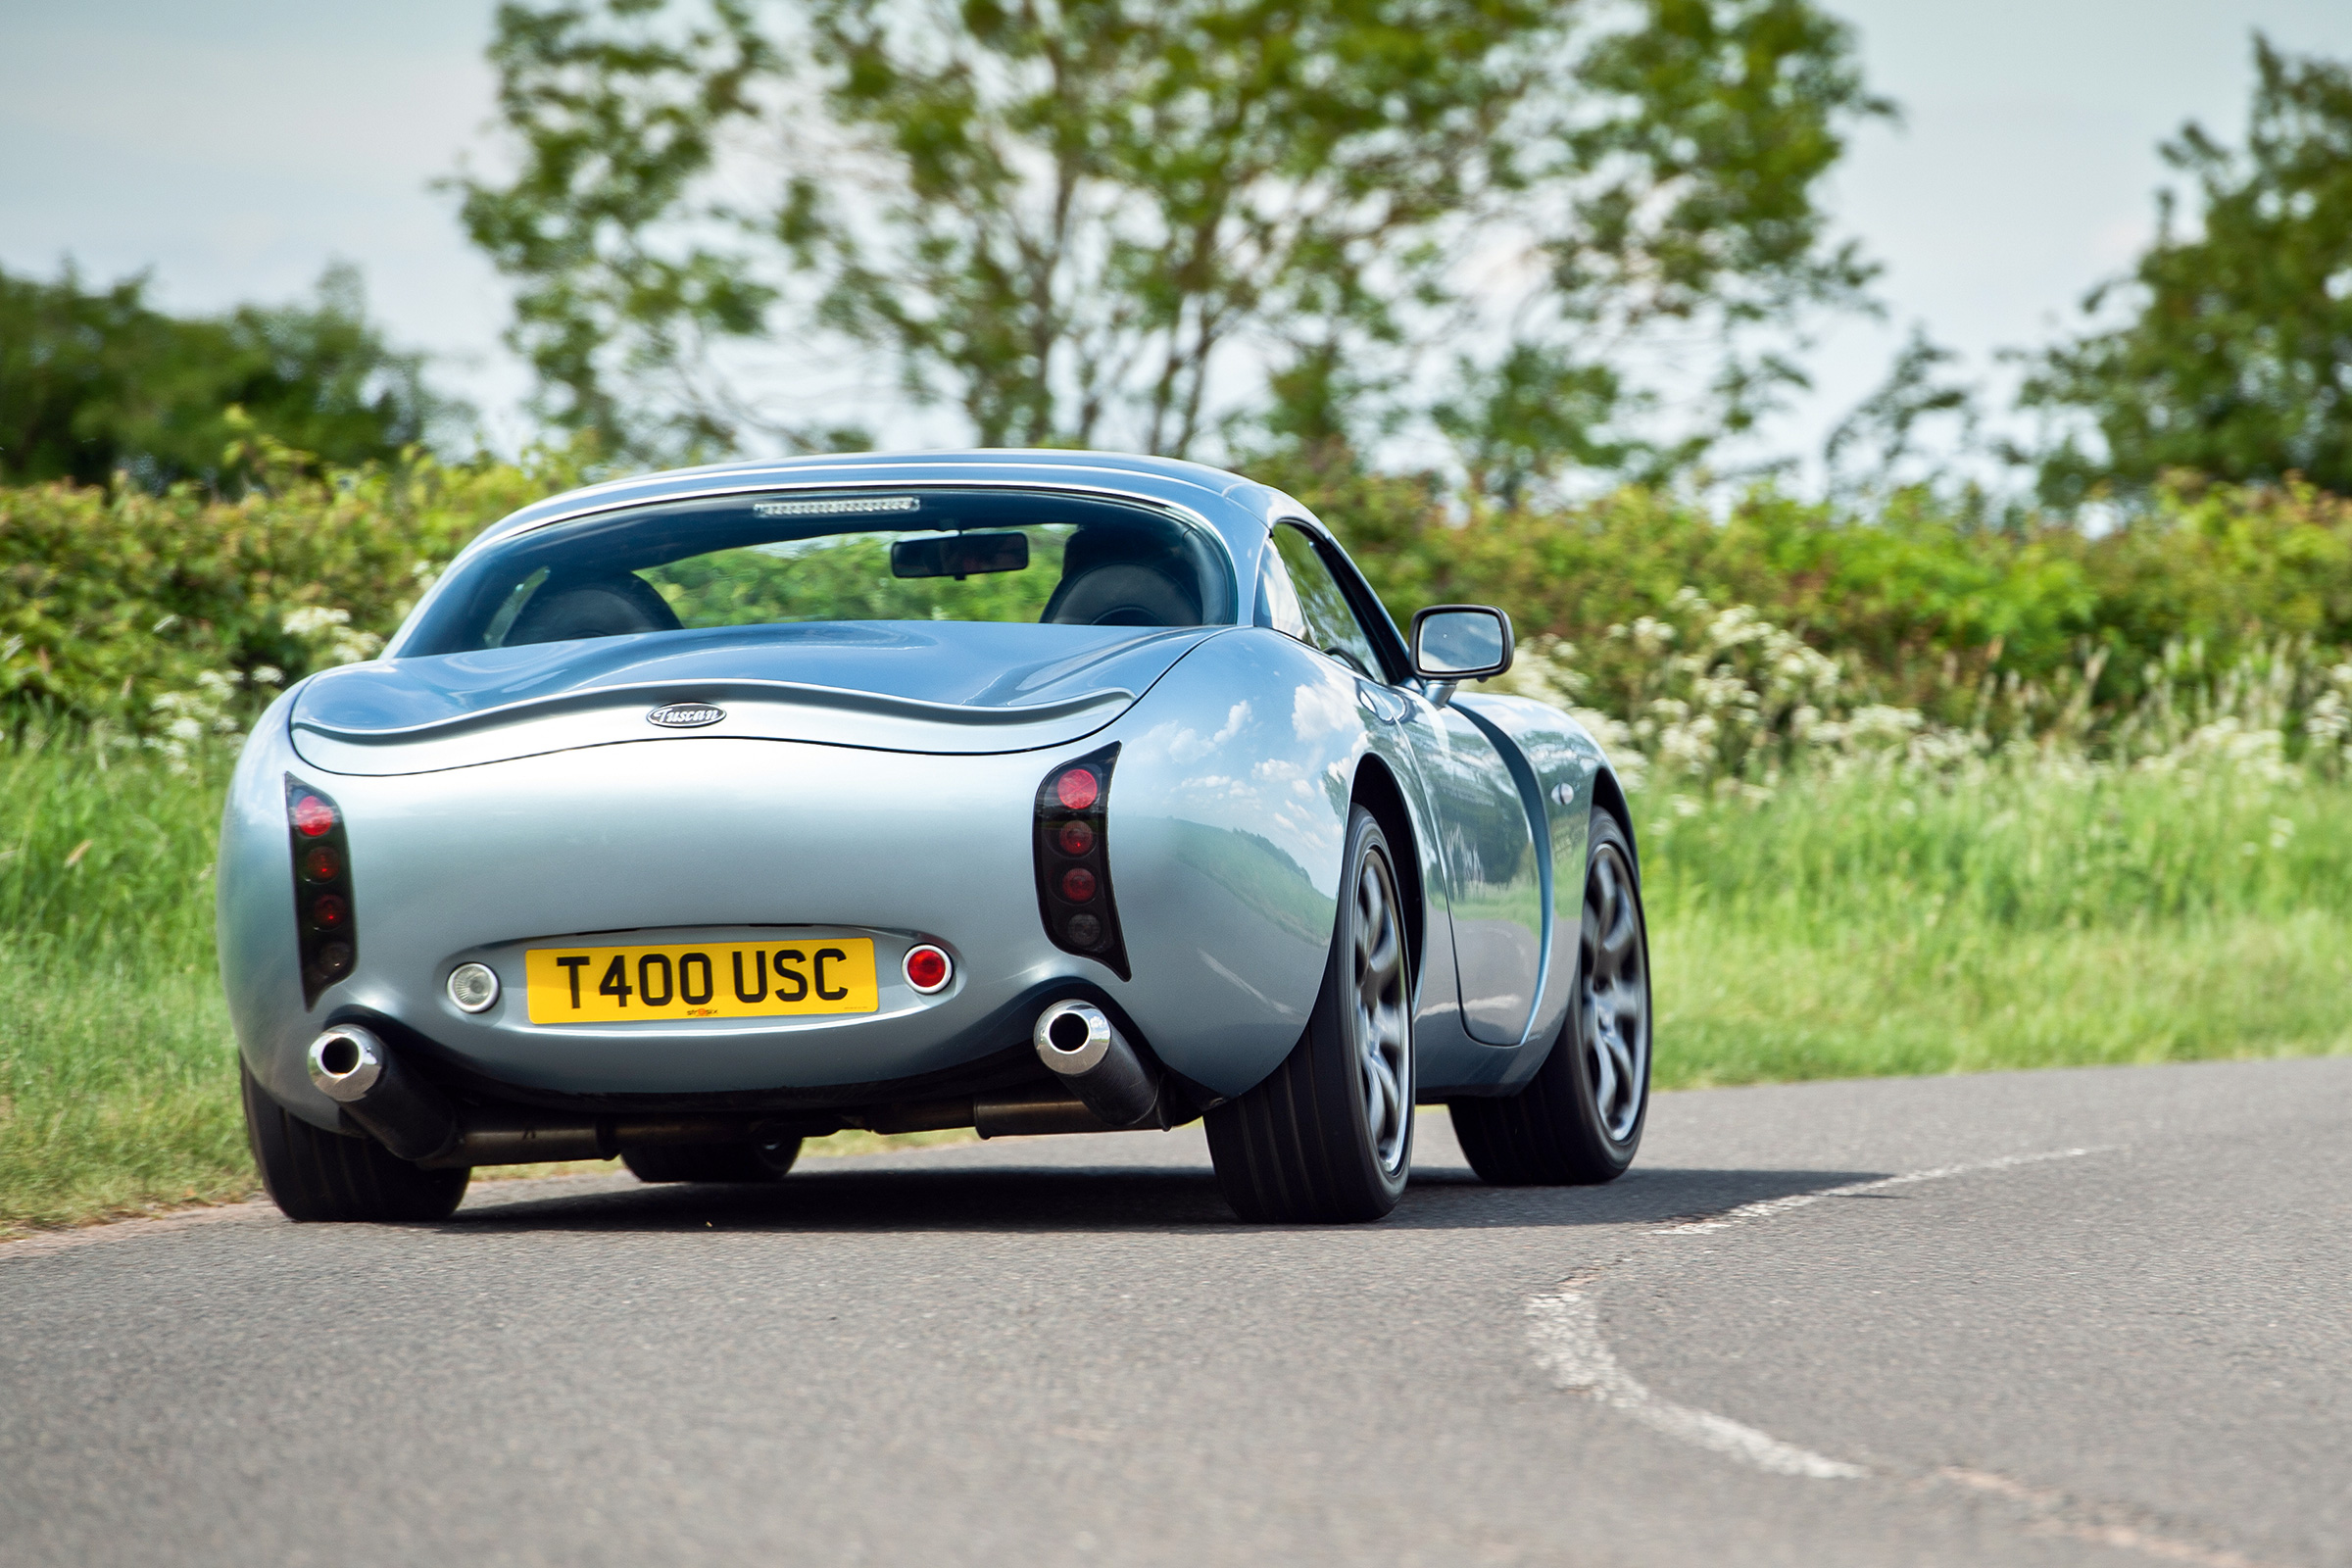 Tvr Tuscan (1999-2006) – Review, History, Prices And Specs | Evo